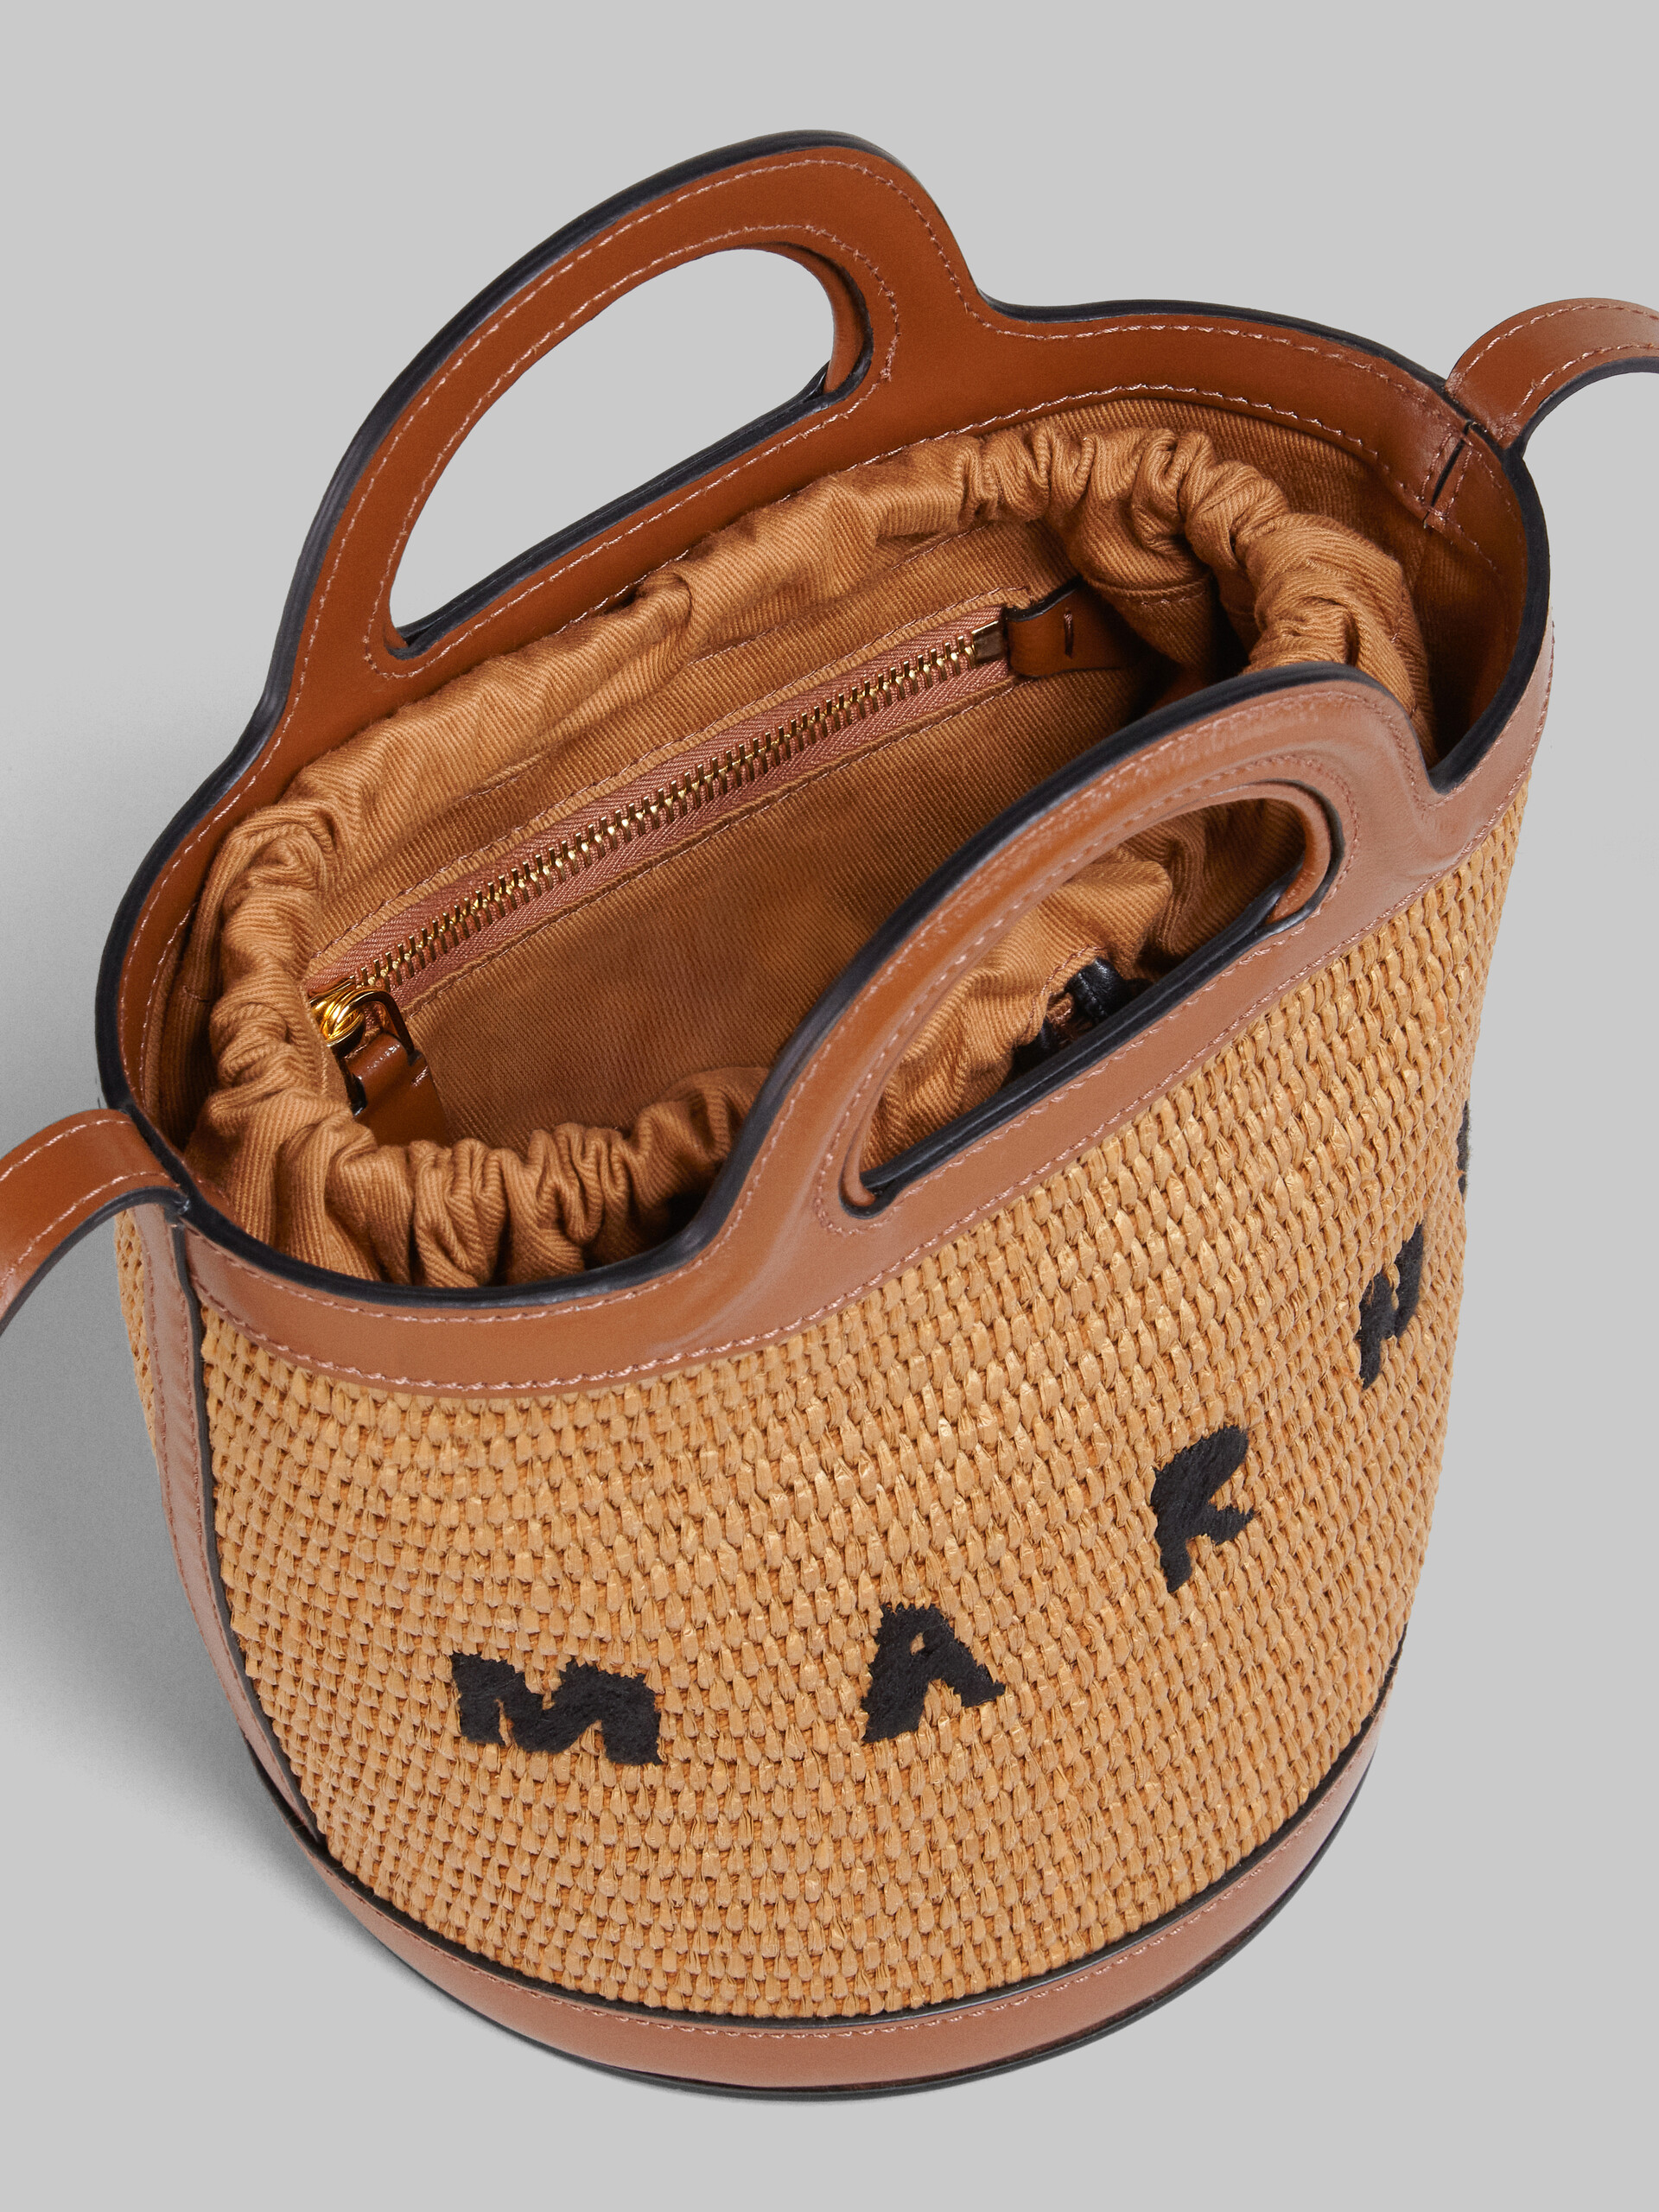 Tropicalia Small Bucket Bag in brown leather and raffia - Shoulder Bags - Image 5